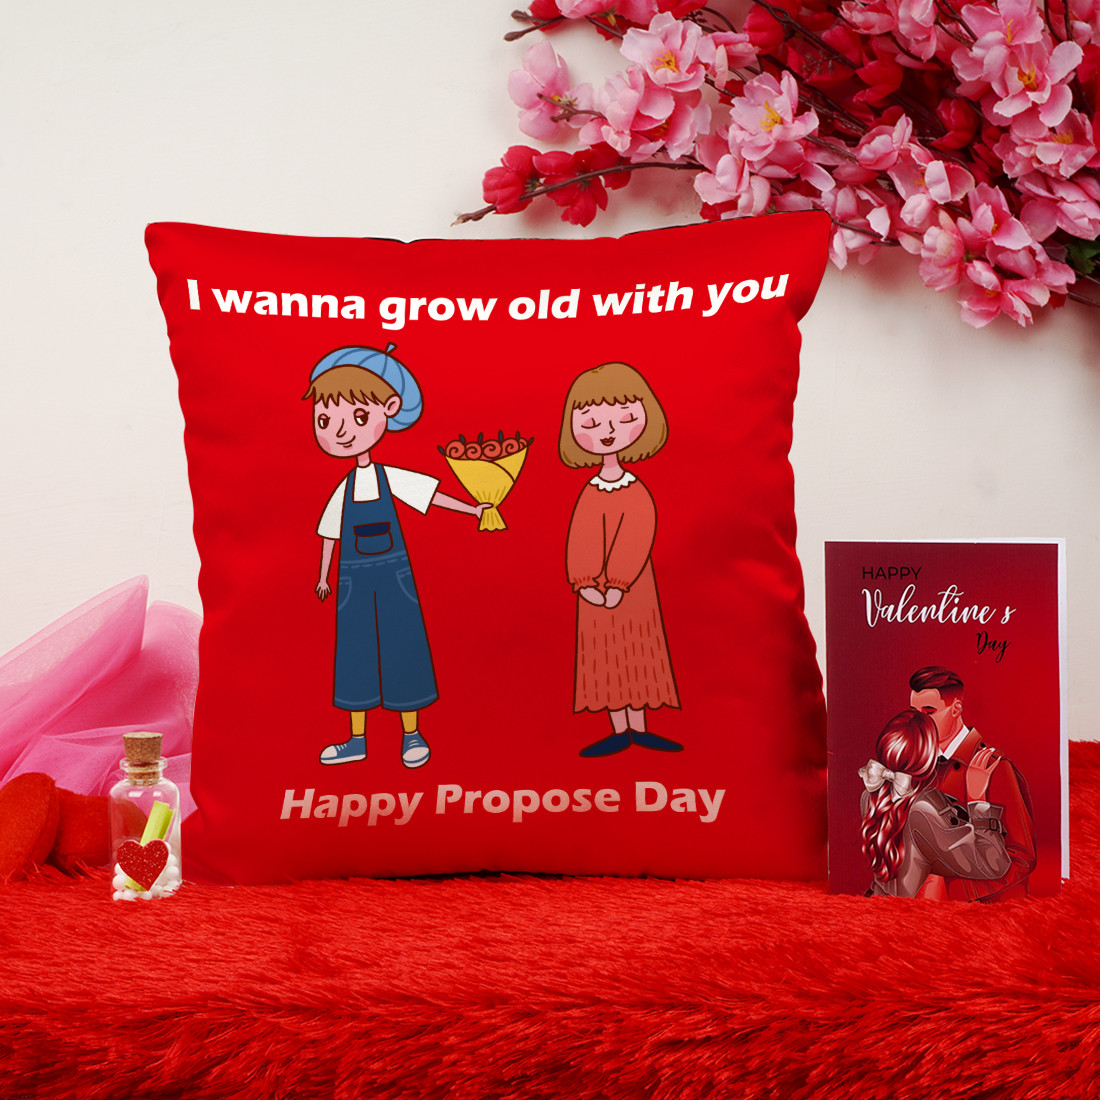 Propose Day Personalized Heart Pop Up Valentine Box With Treats: Gift/Send  Food Gifts Online J11153773 |IGP.com